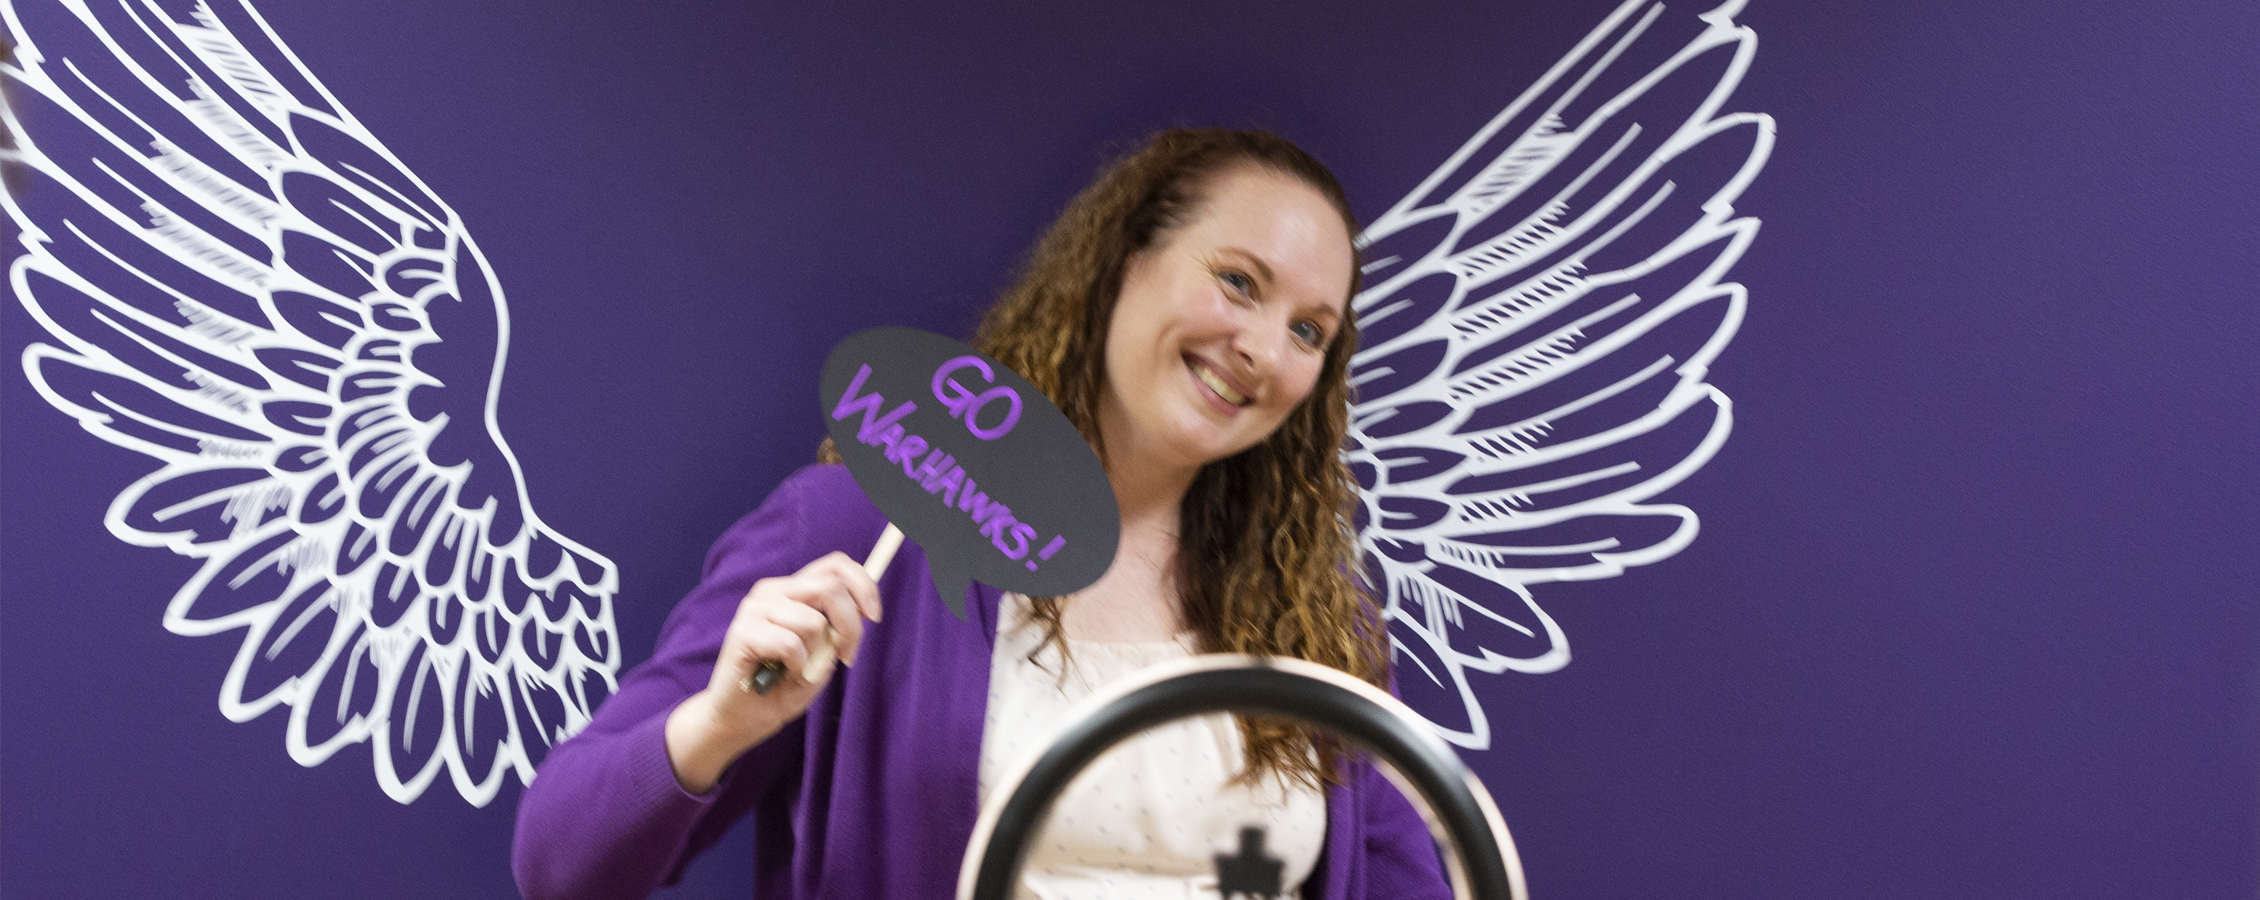 Person stands in front of a purple background with white wings.